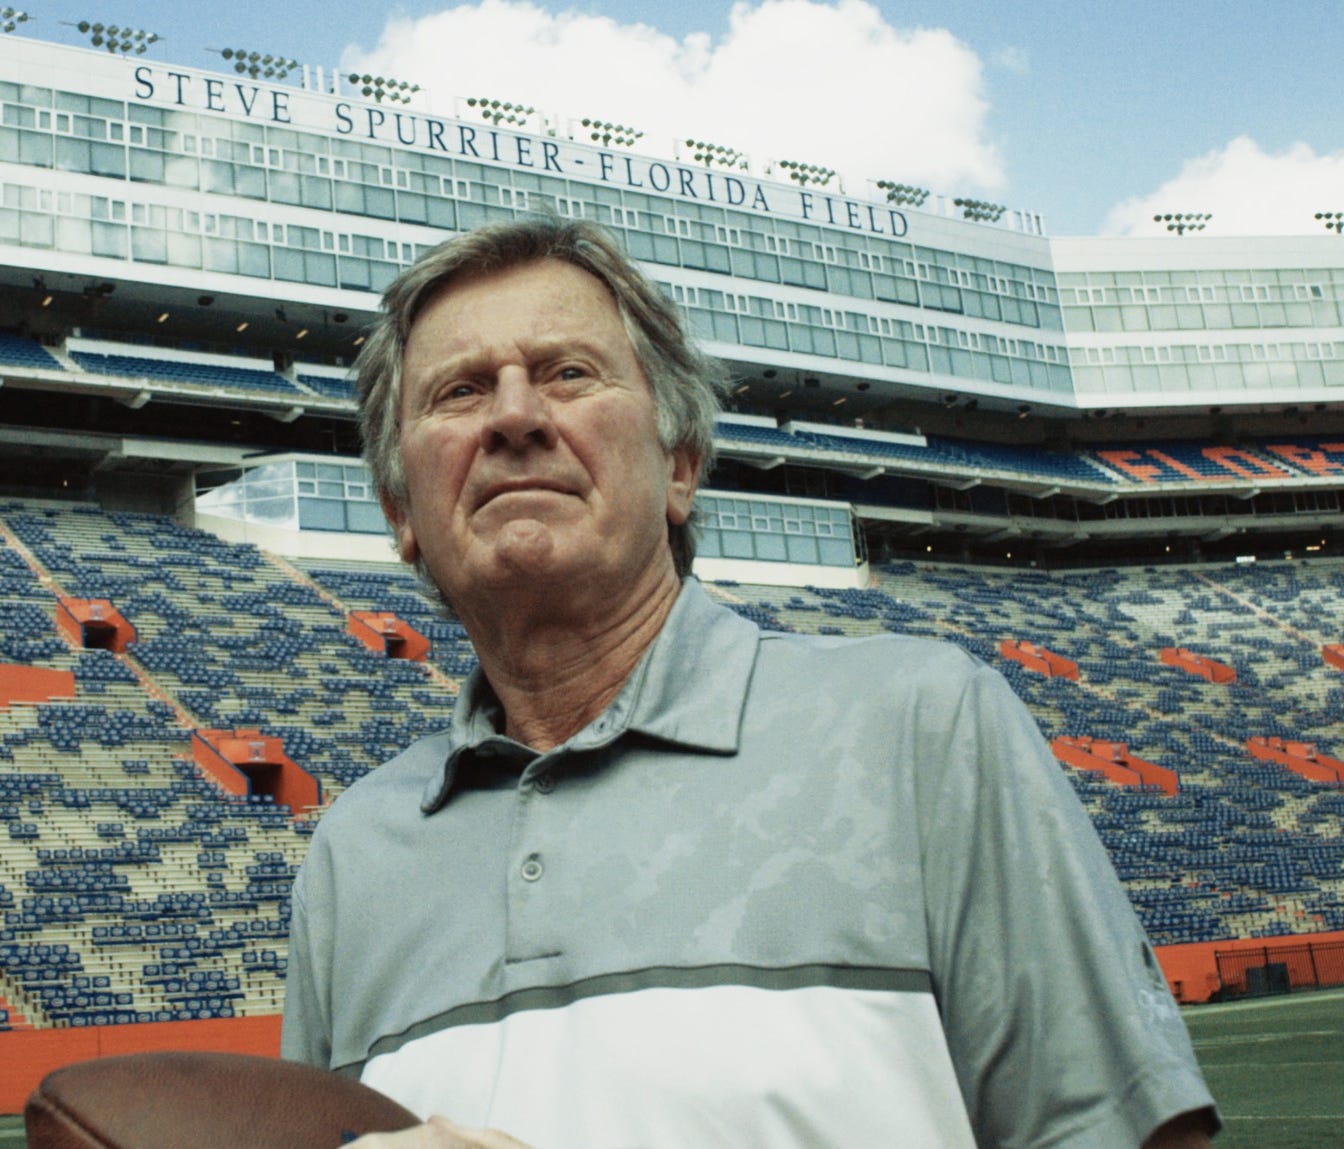 Steve Spurrier stands on the football field at University of Florida, named after him for his achievements as a player and a coach.